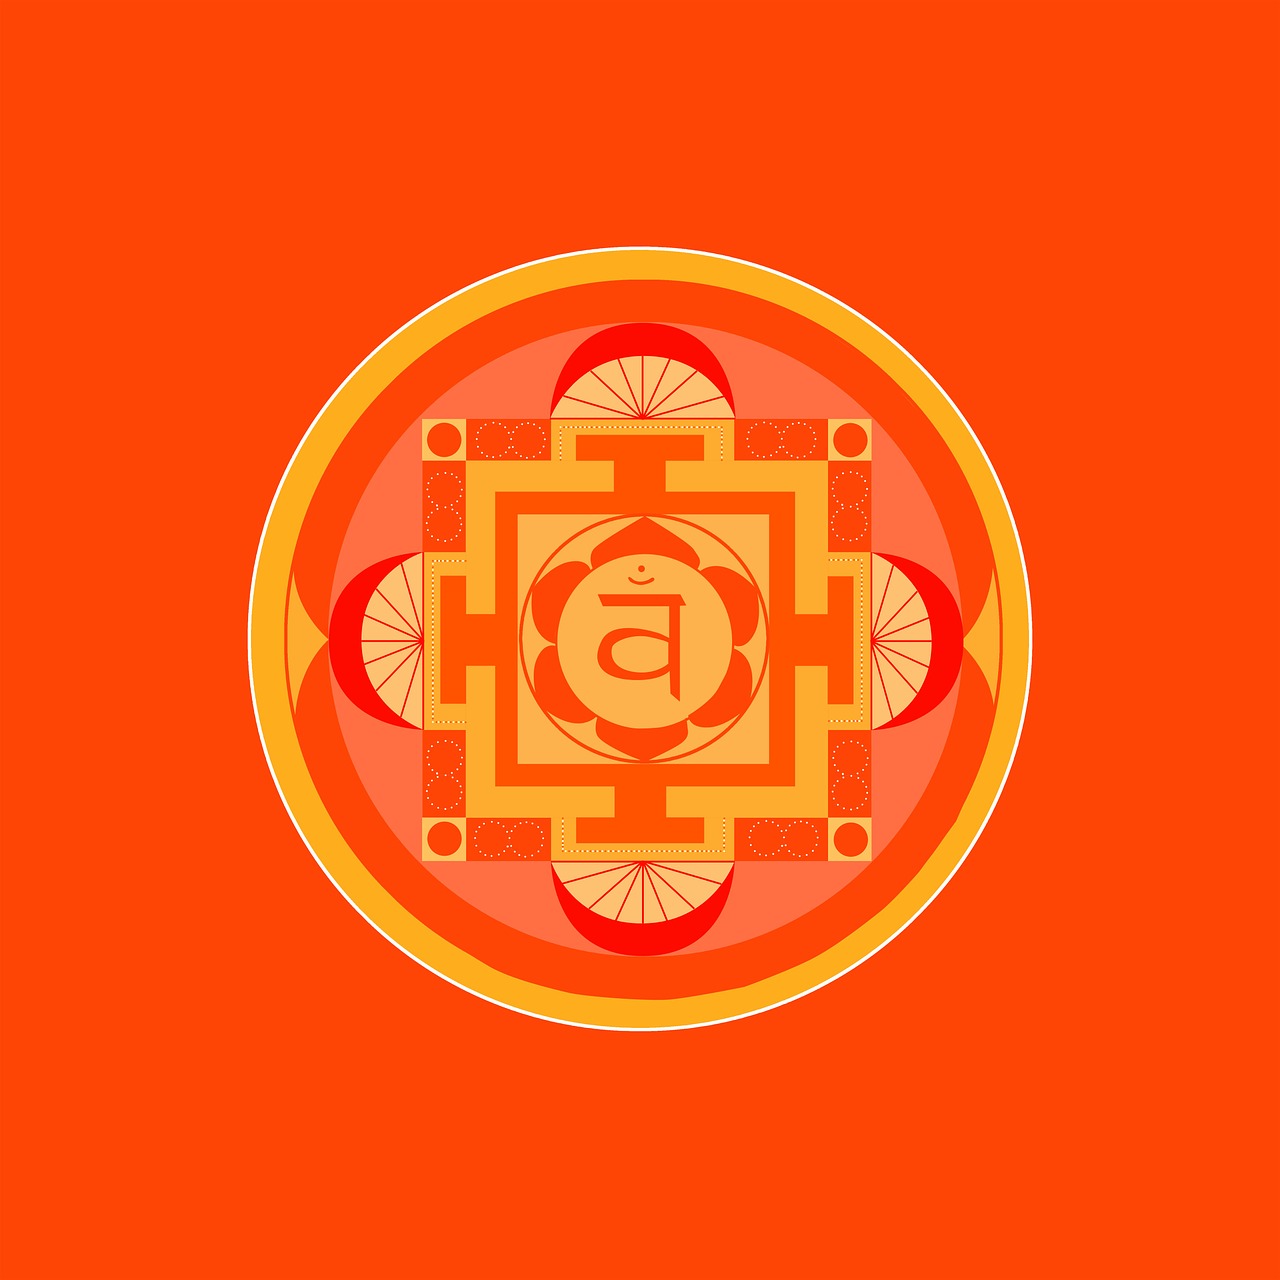 Tips on Balancing the Sacral Chakra | Herbal Academy | Learn what the sacral chakra of the body is, and get tips on balancing it using herbs, foods, and essential oils.